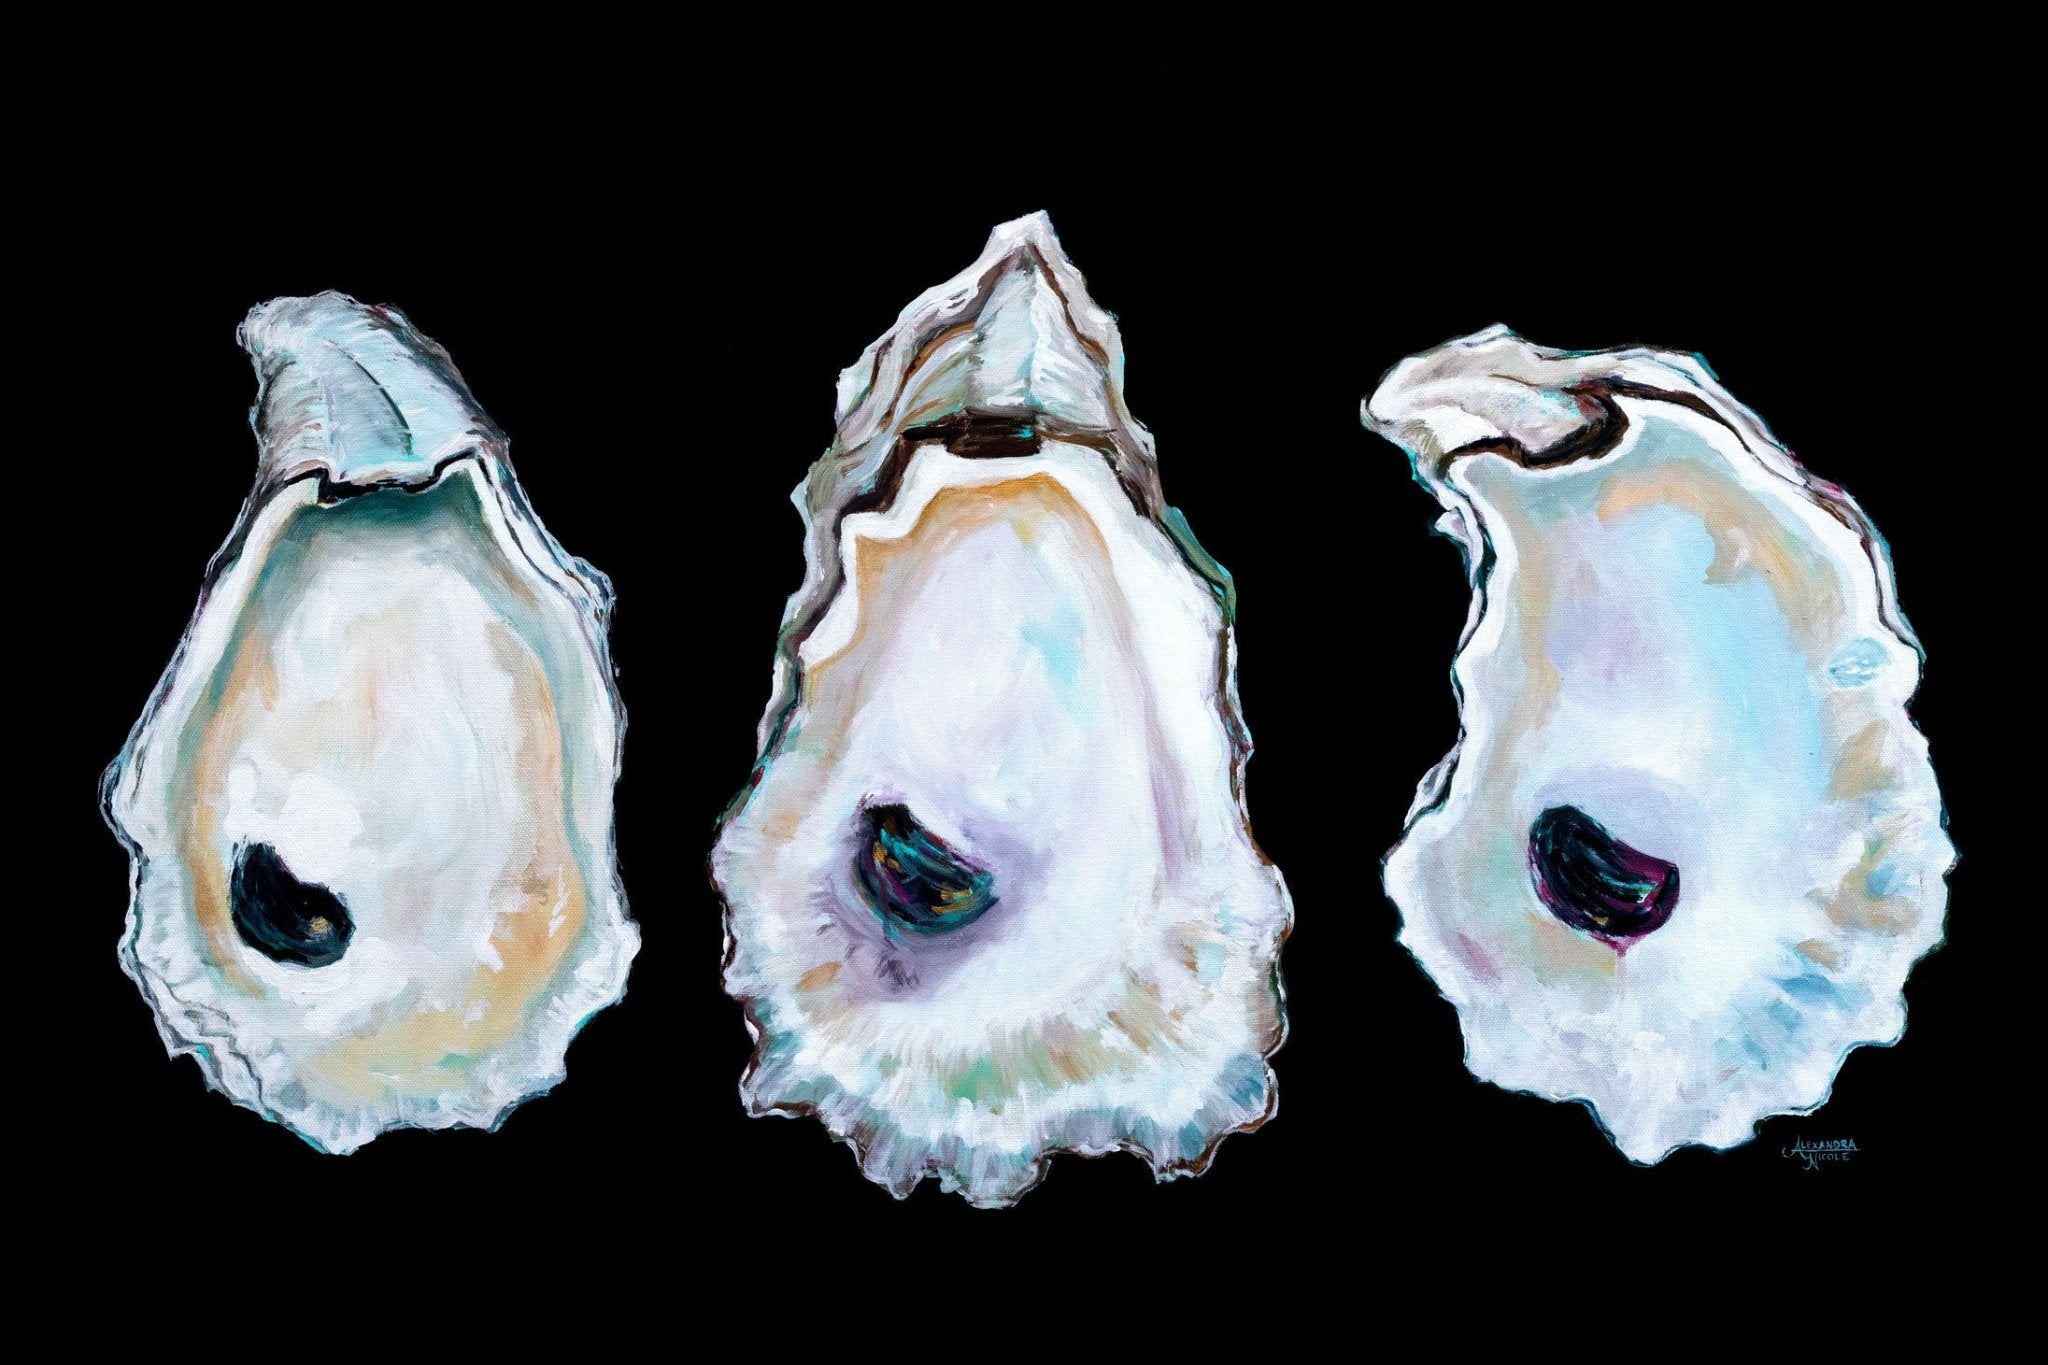 Oyster Shell Printed on Rolled Canvas - ArtByAlexandraNicole